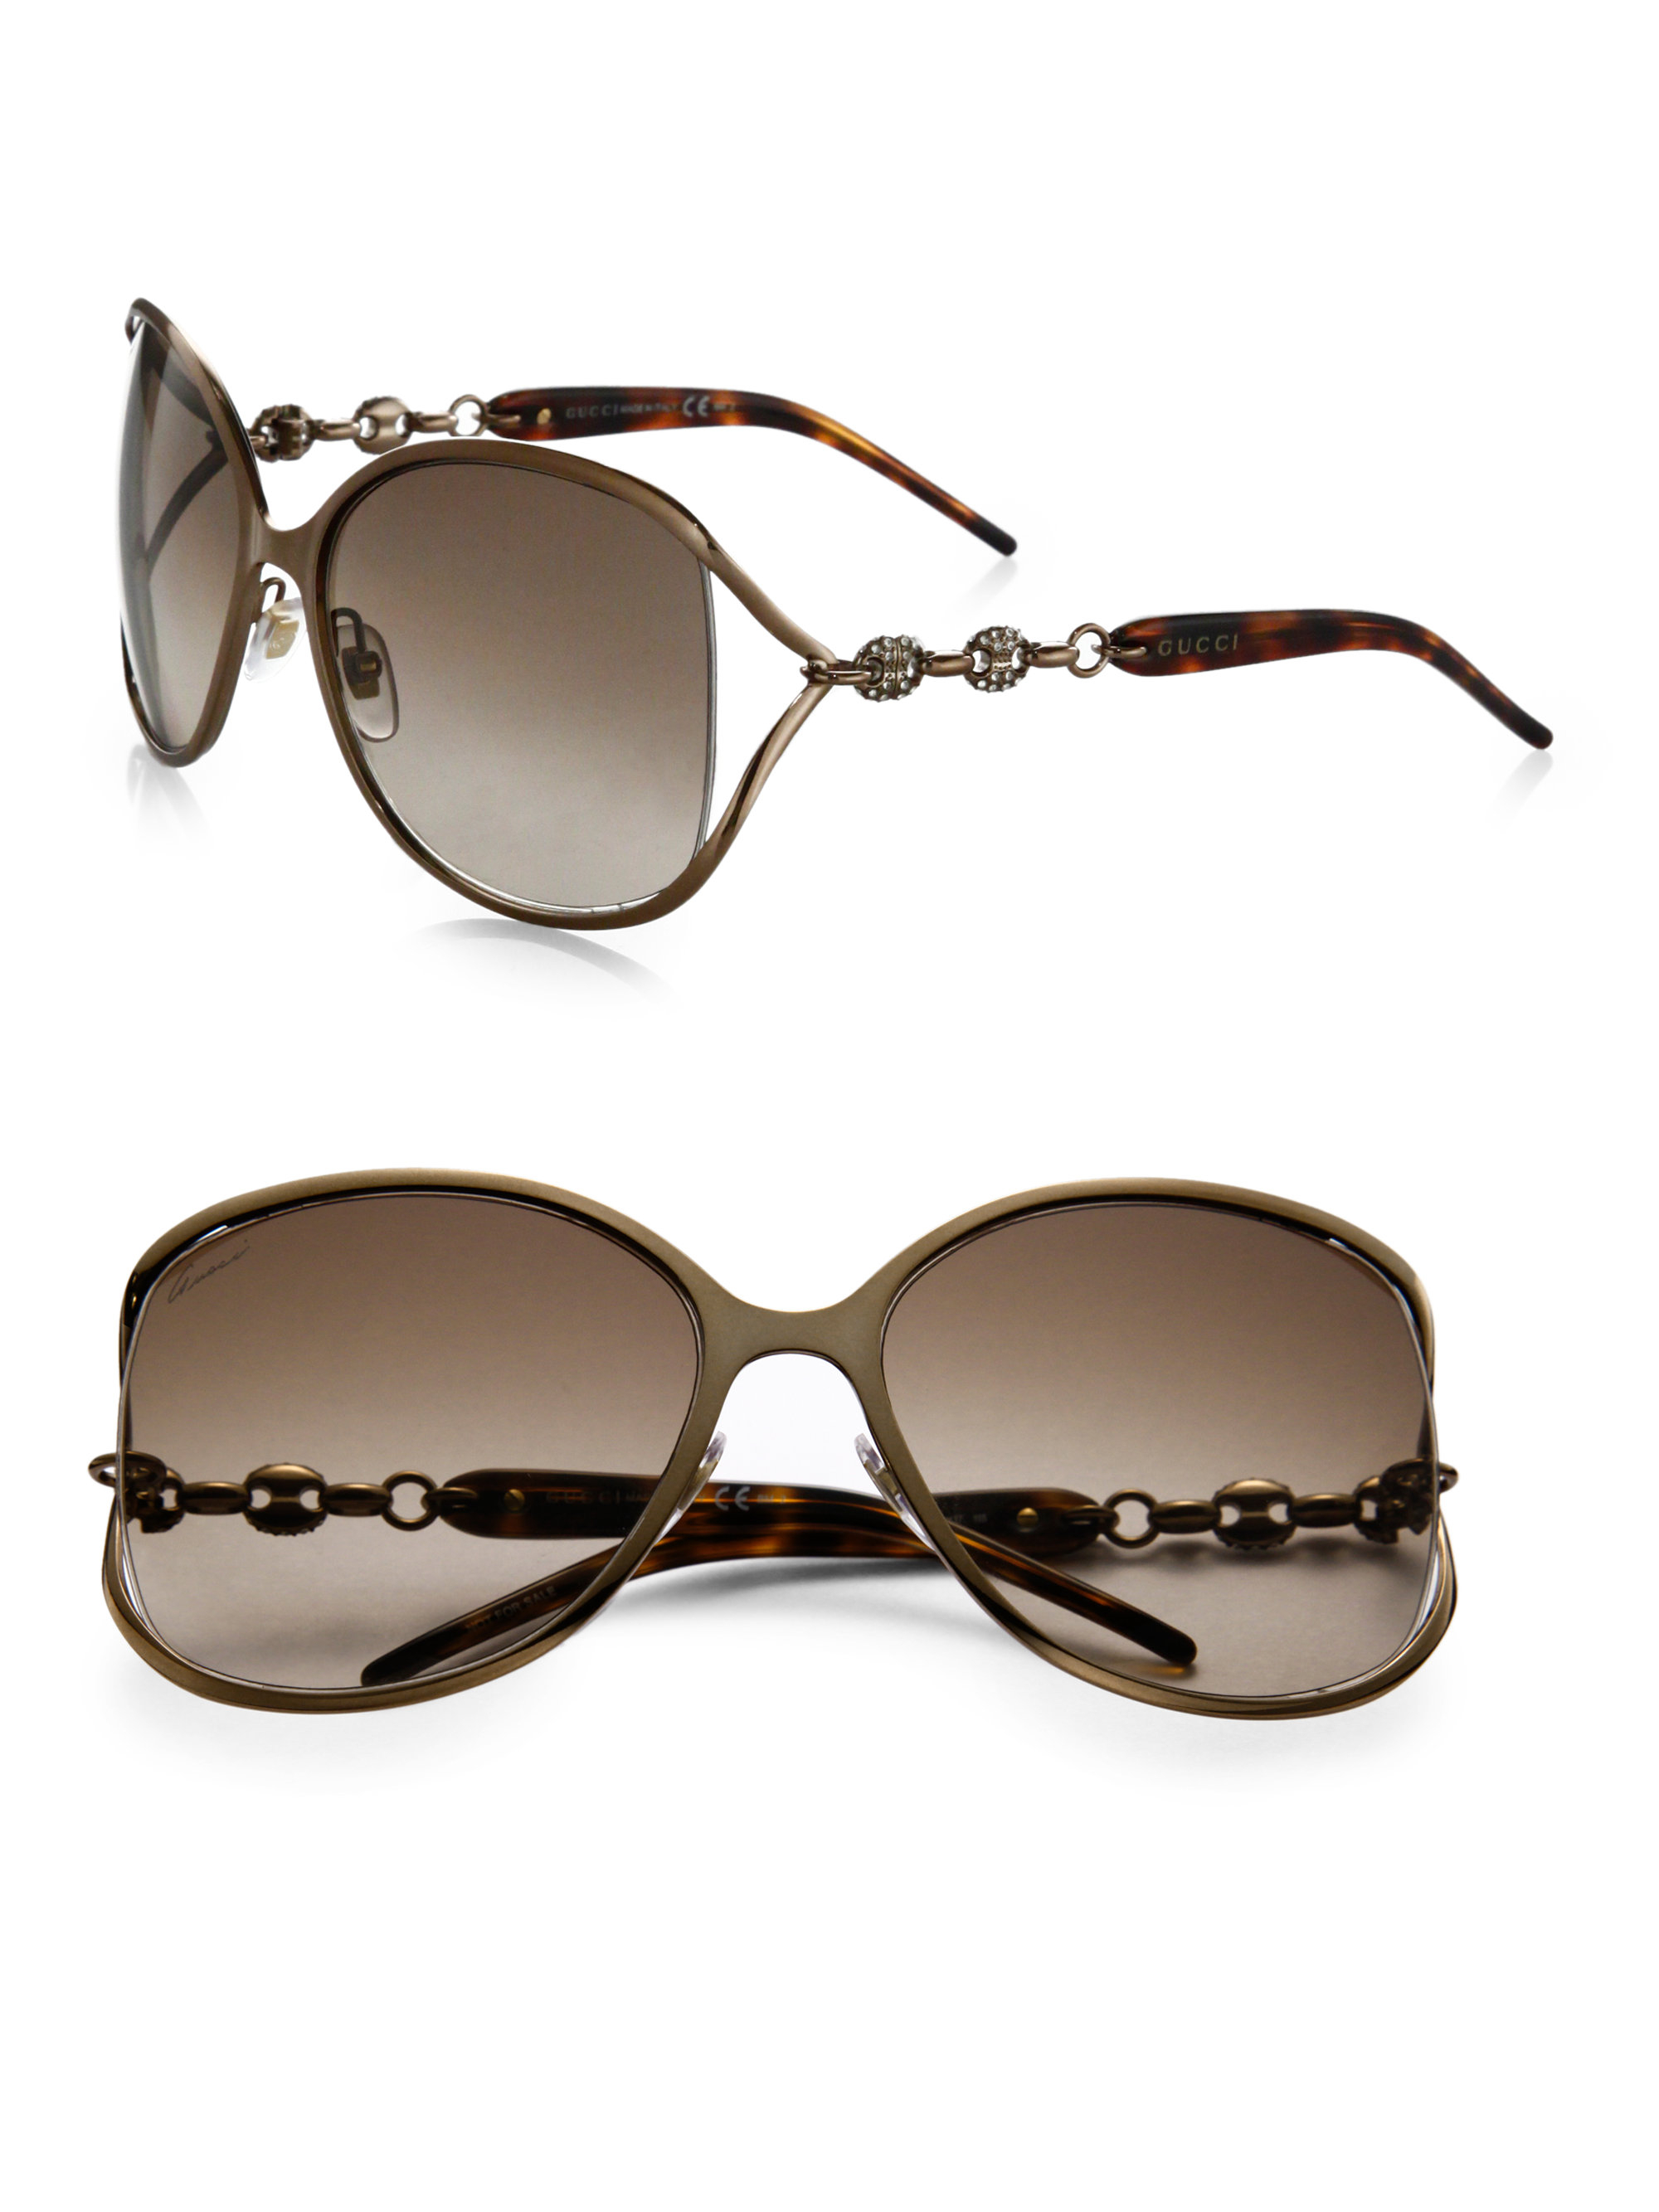 house of fraser gucci sunglasses